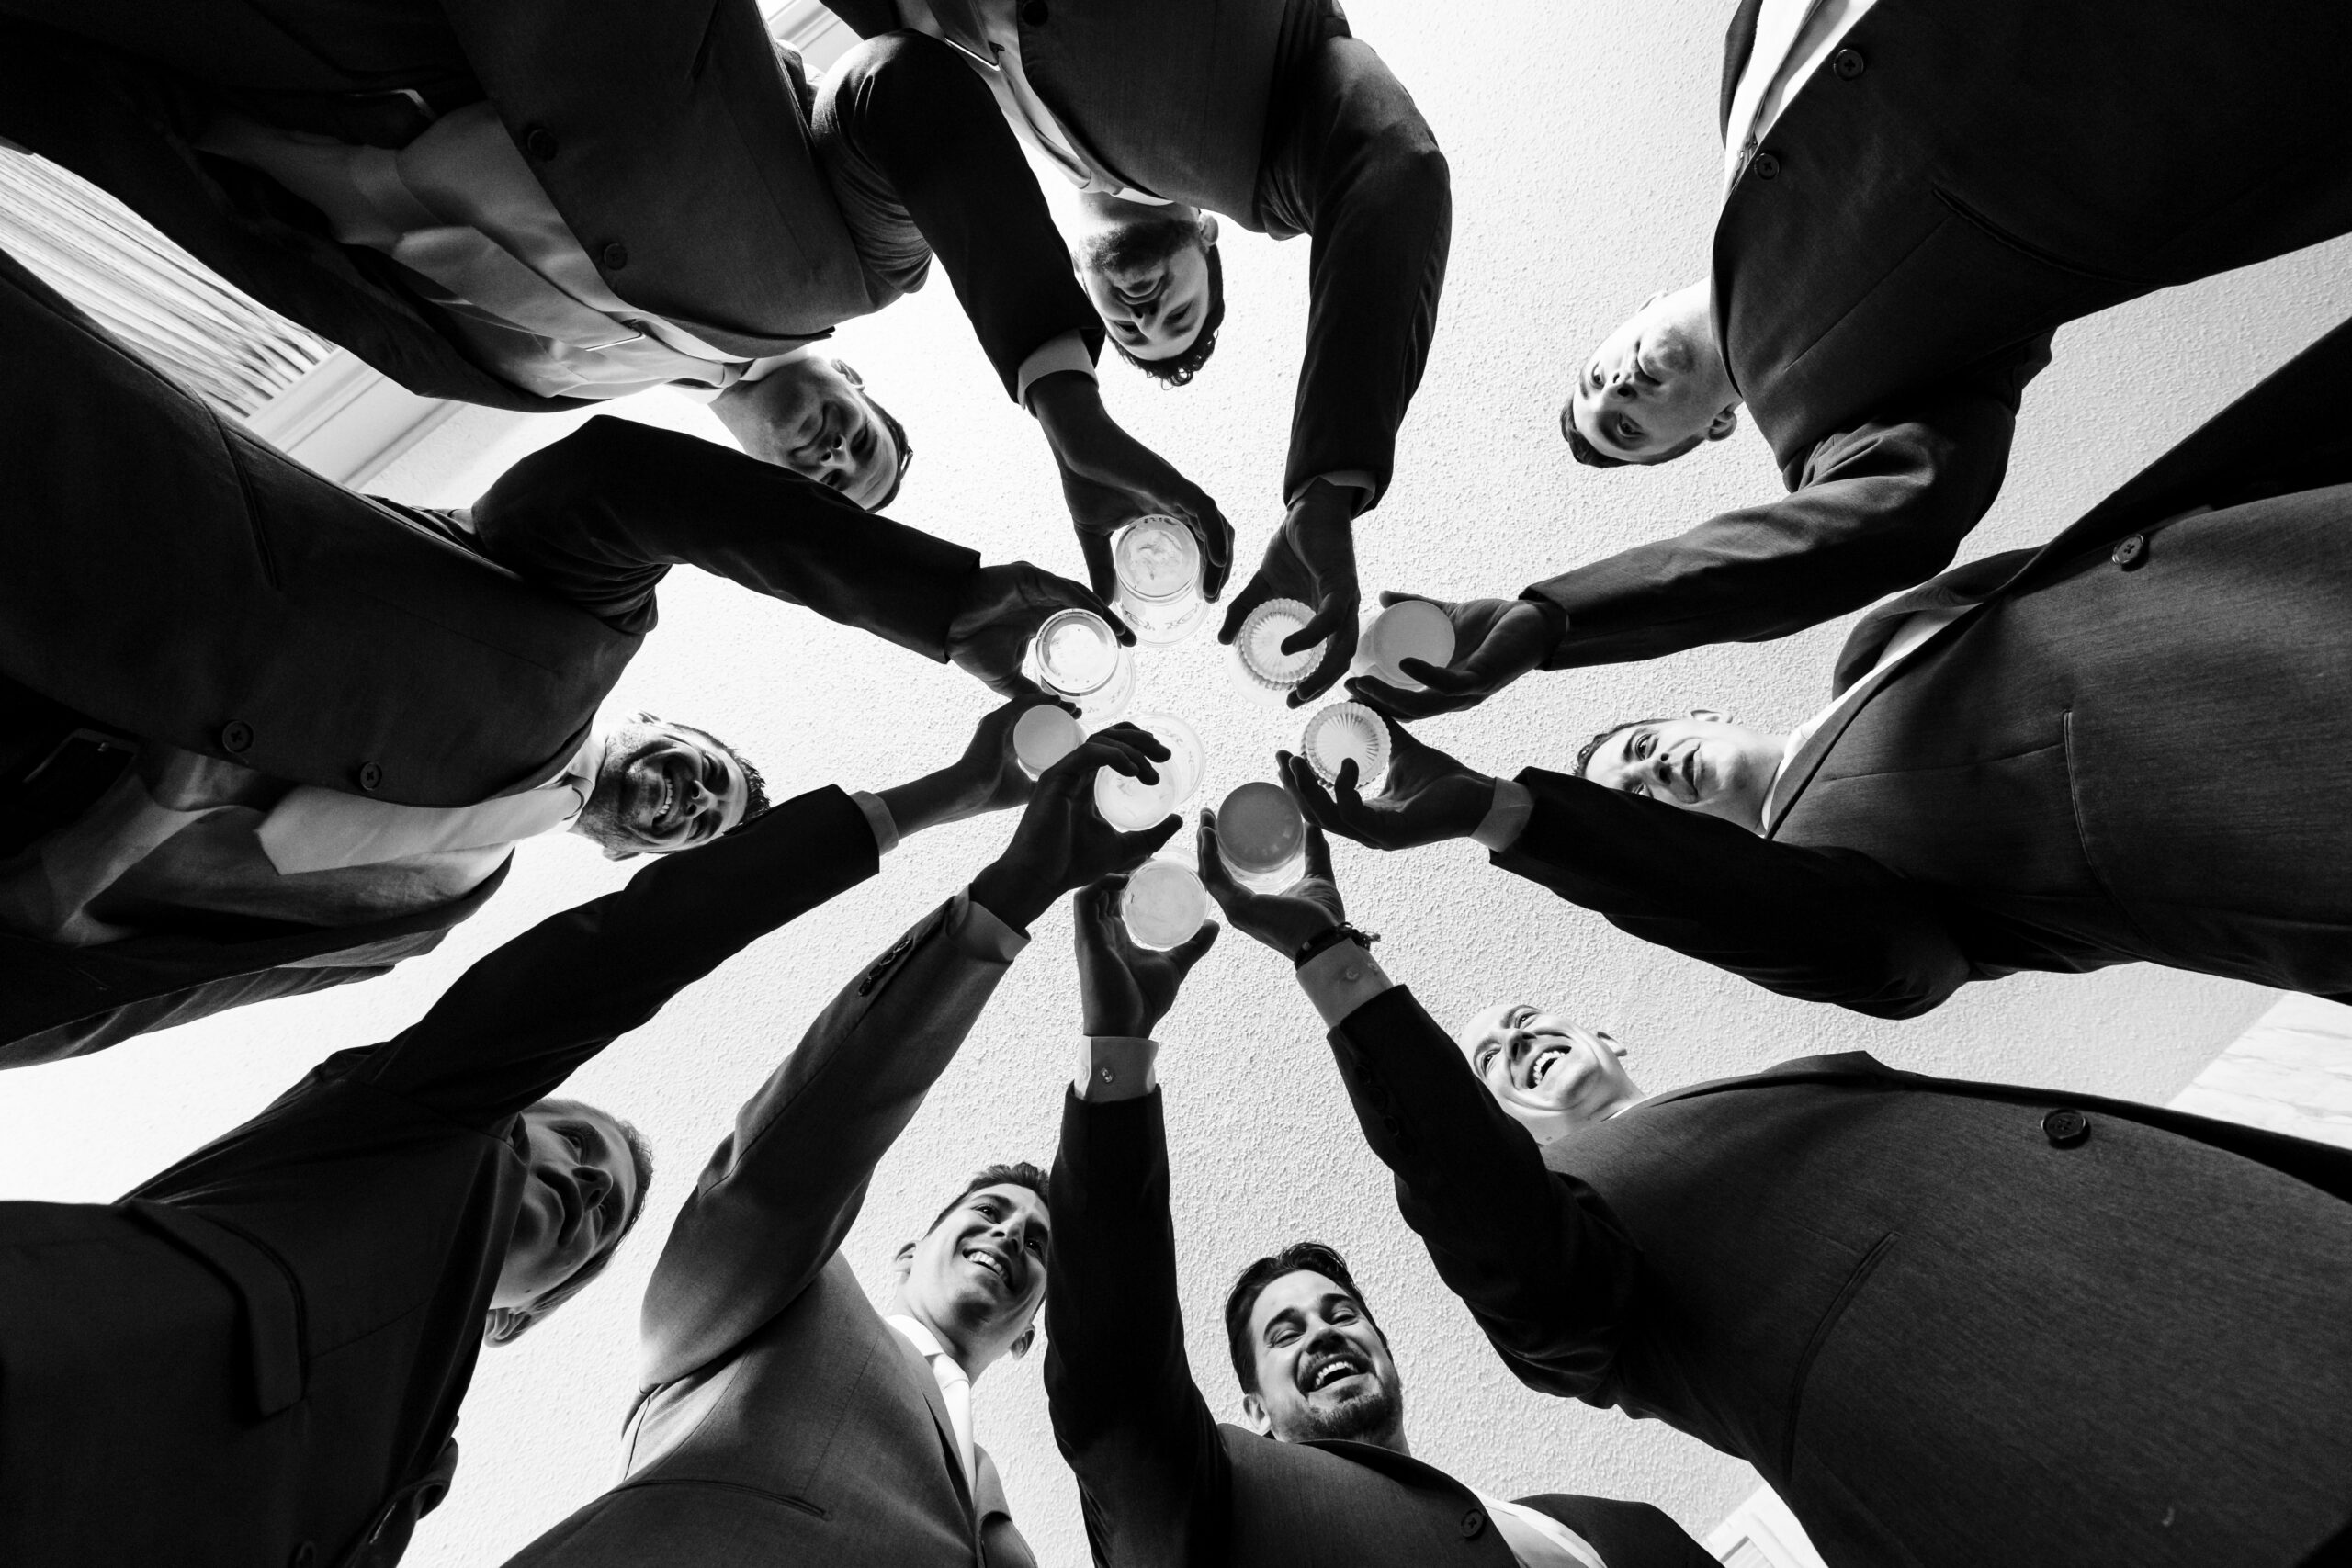 A group of business people holding hands in a circle, captured by New Jersey Wedding Photographer Jarot Bocanegra.